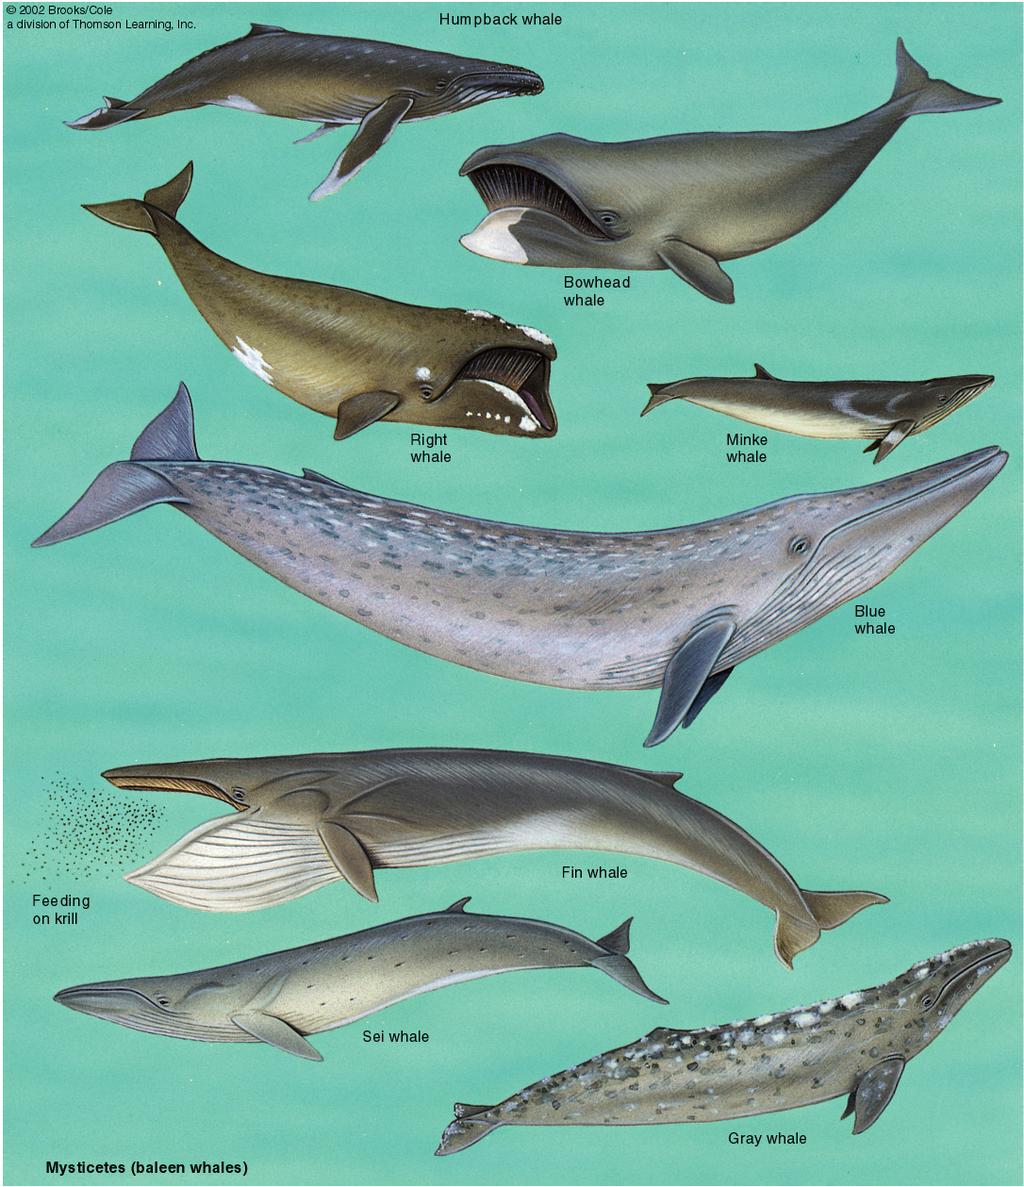 Mysticetes (baleen whales) Use complex